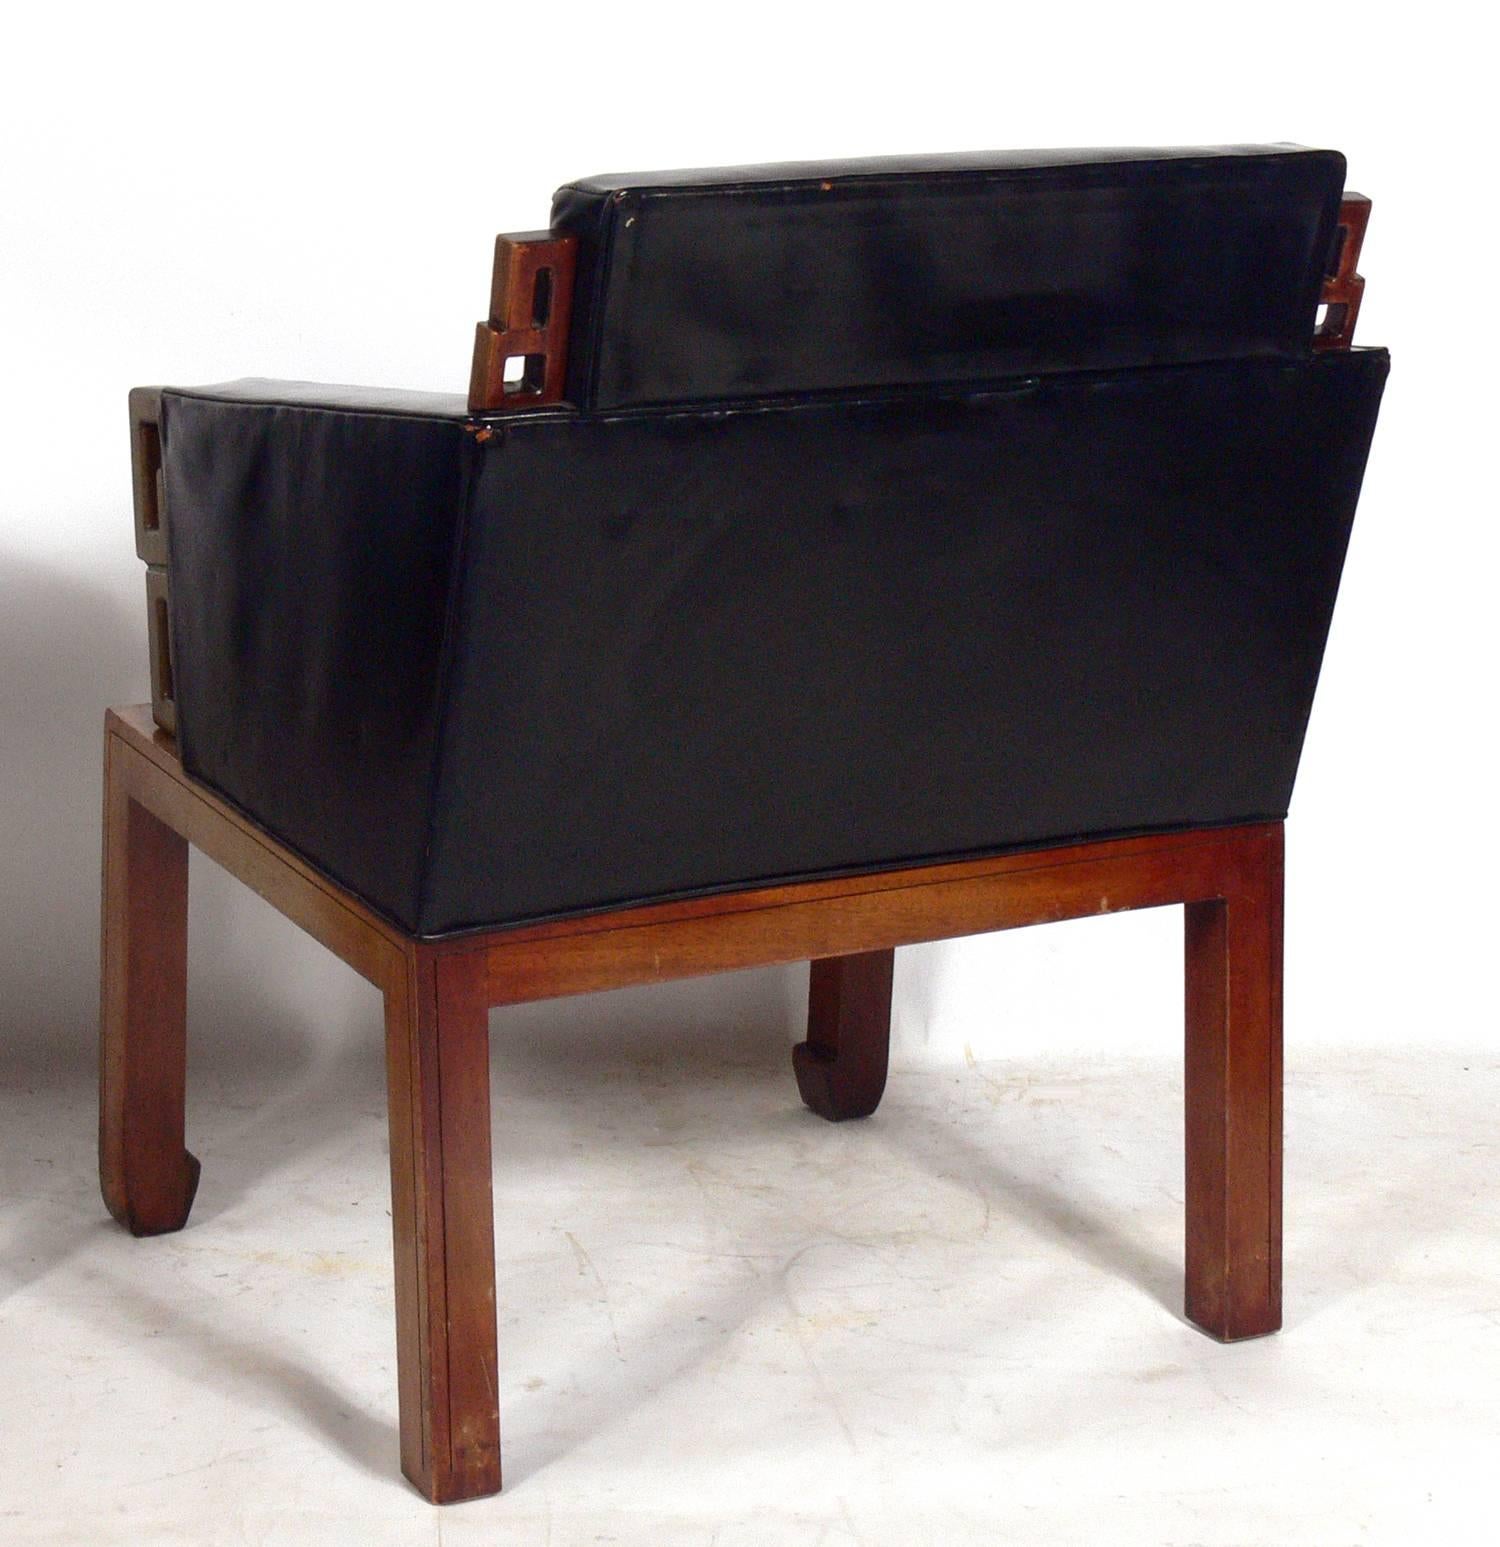 Mid-Century Modern Pair of Asian Influenced Leather Lounge Chairs Attributed to James Mont